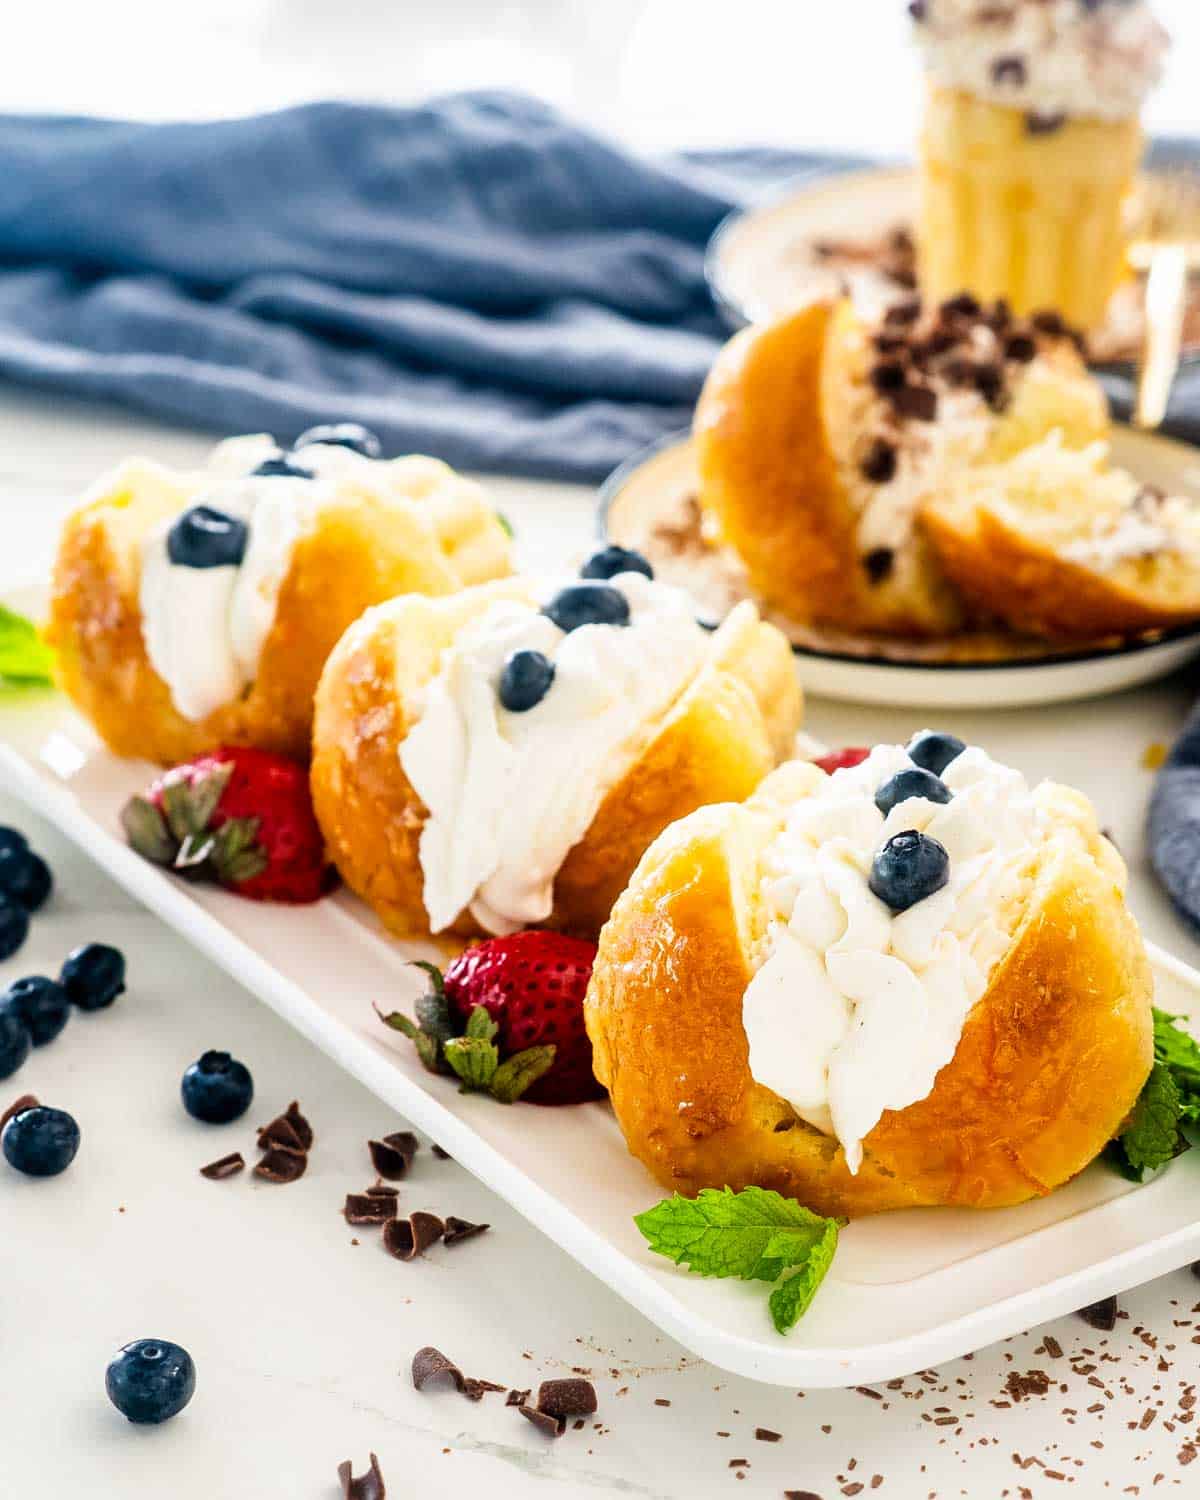 3 rum babas on a white platter topped with whipped cream and berries.